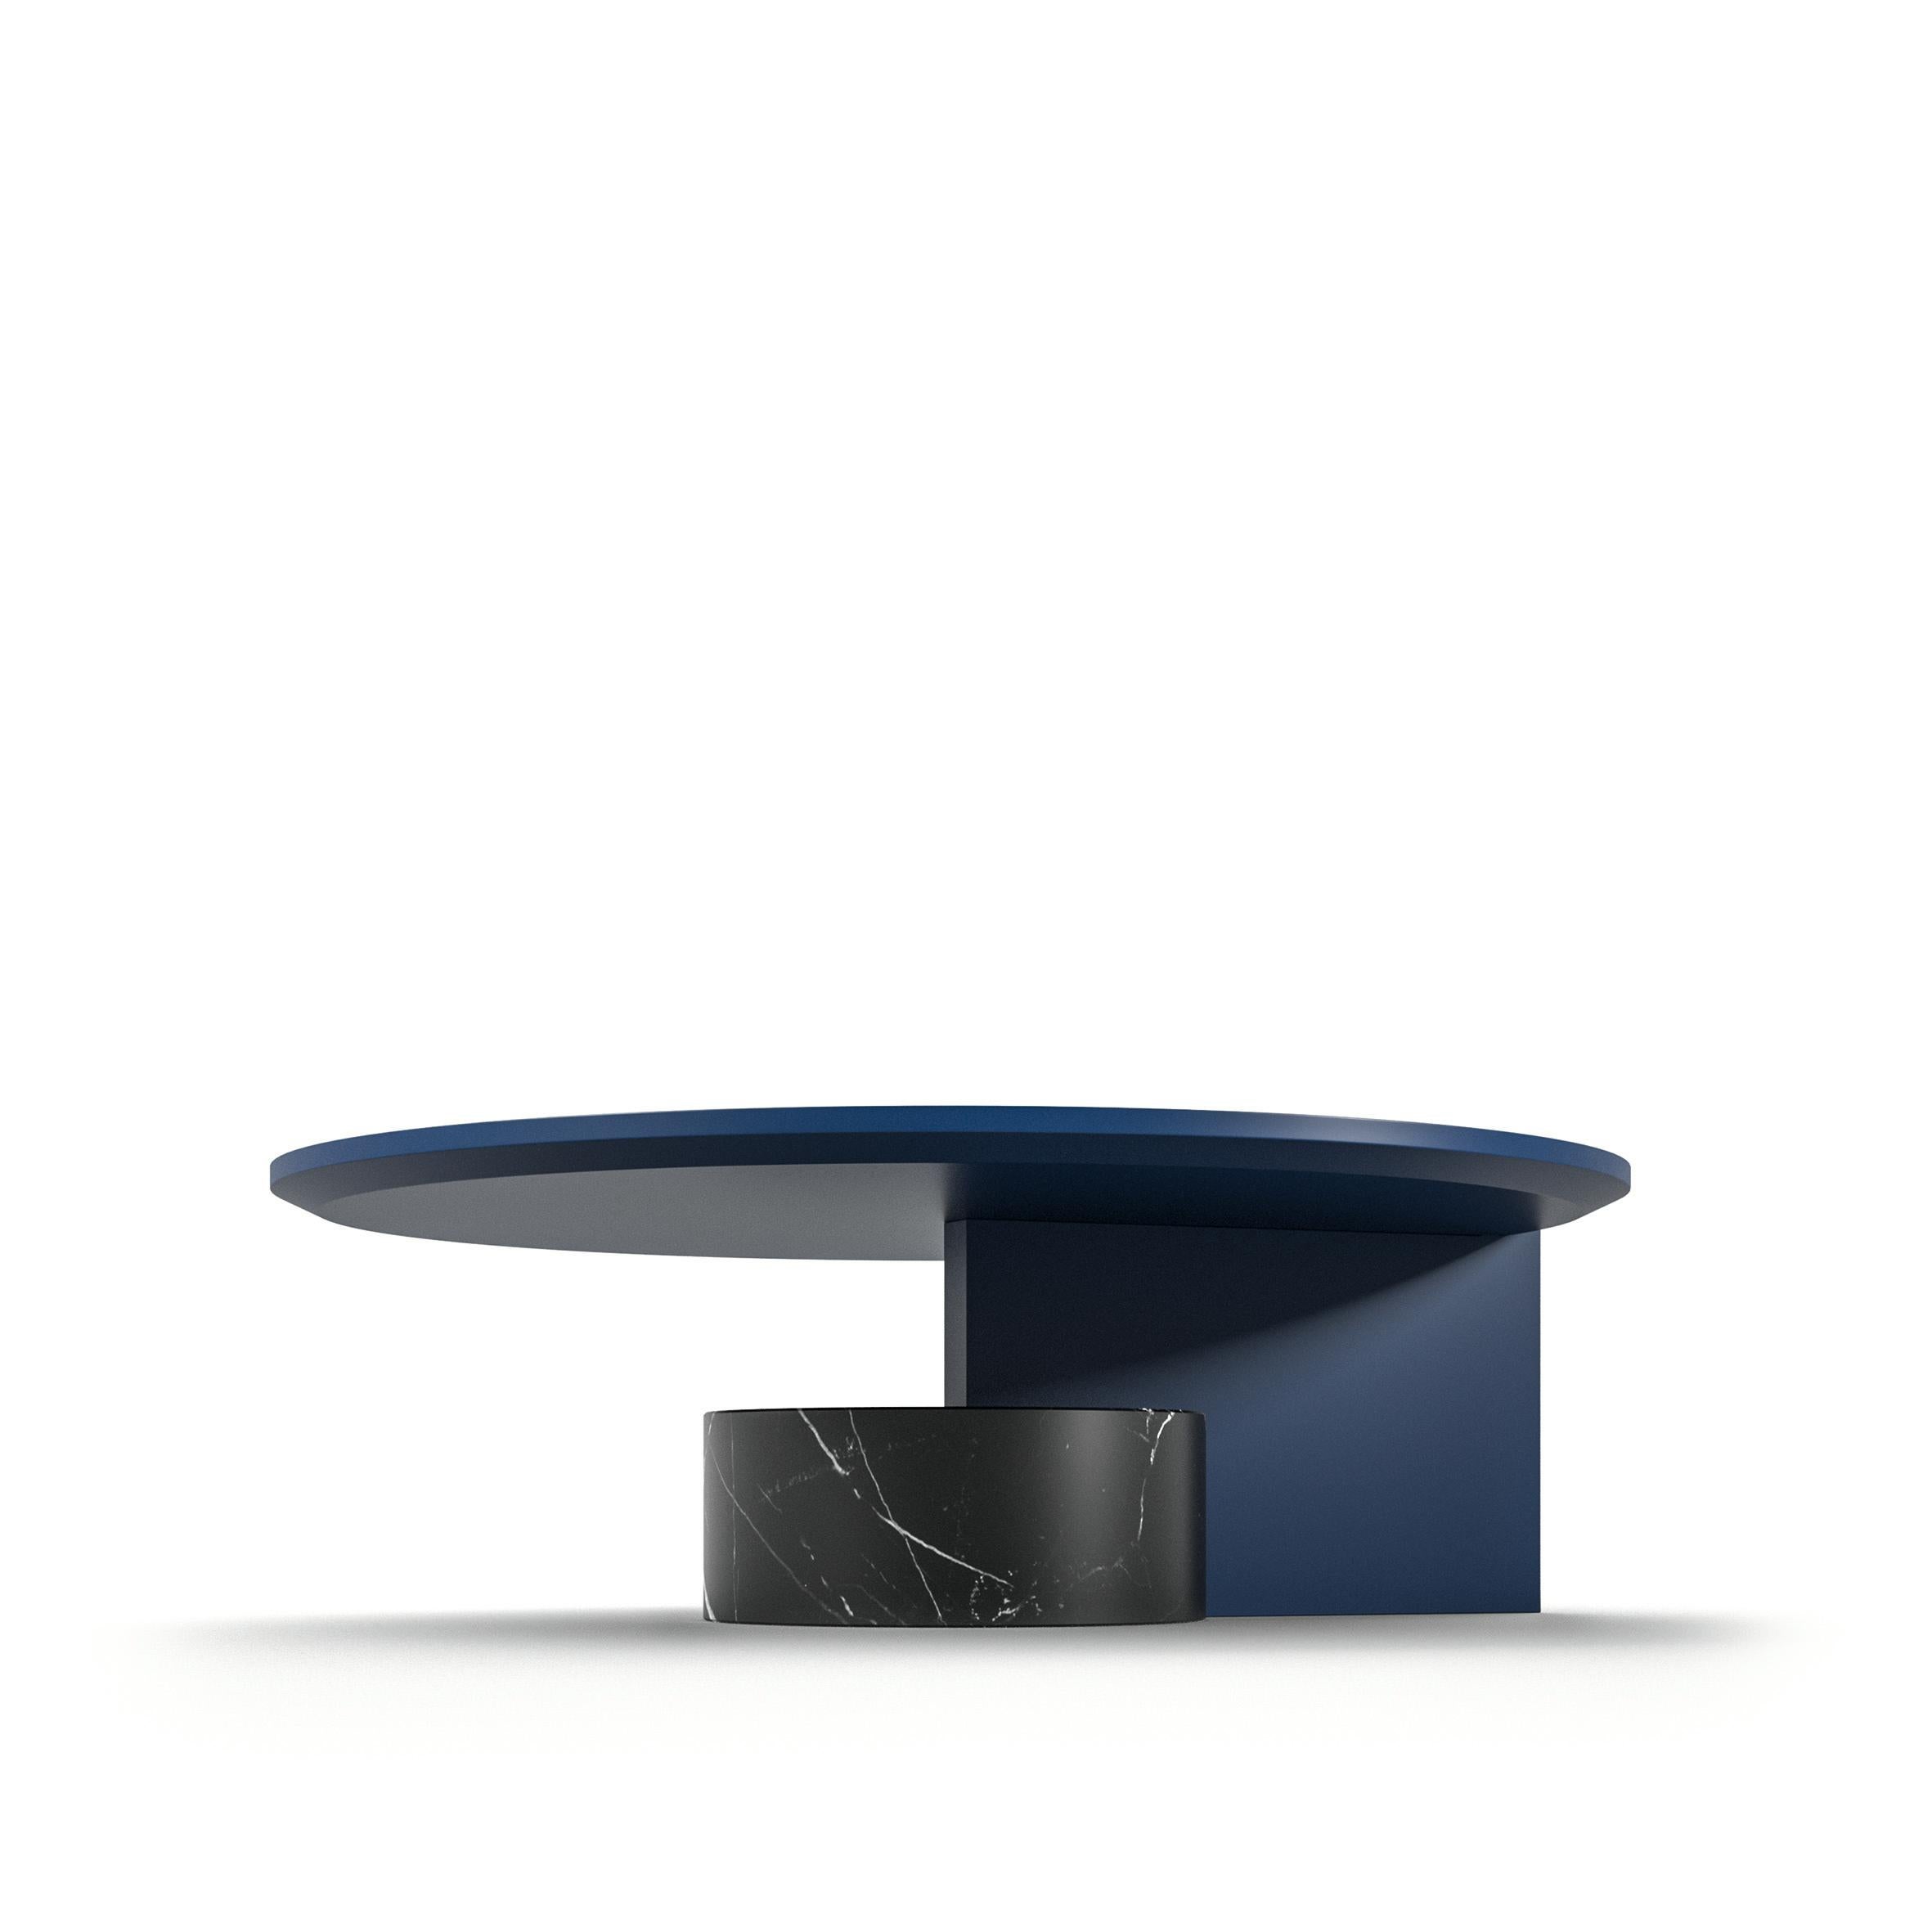 Sengu Low Table designed by Patricia Urquiola.
Manufactured by Cassina (Italy).

DESIGN LOW TABLES
A collection of three designer low tables by Patricia Urquiola in combination with the eponymous sofa, they are the answer to any modern furnishing